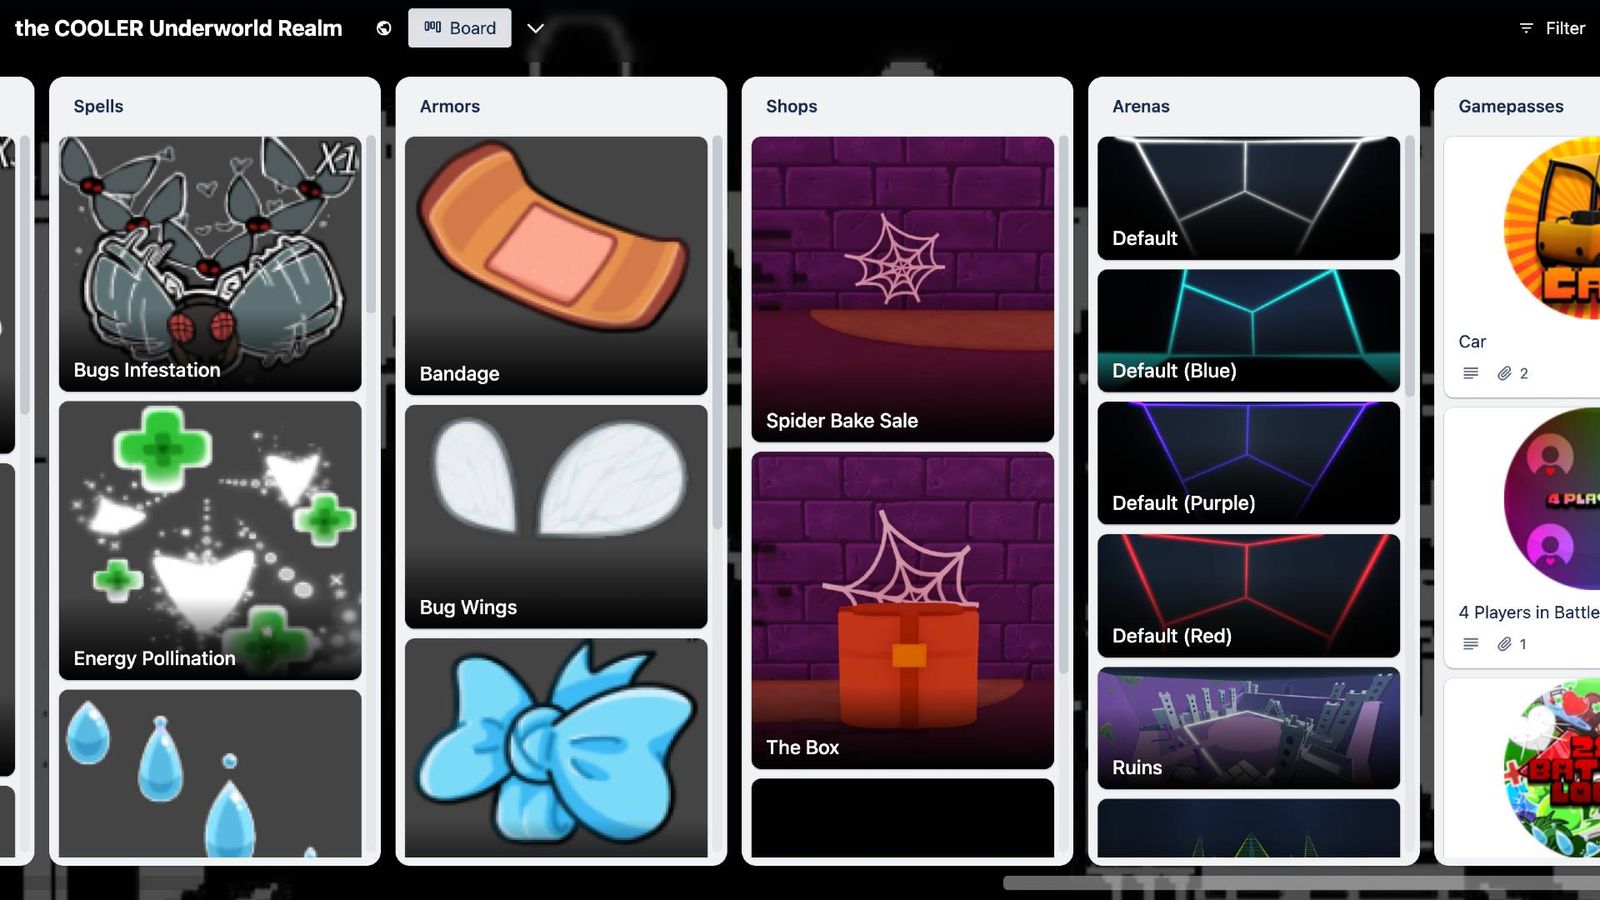 An image of the Underworld Realm Trello page.